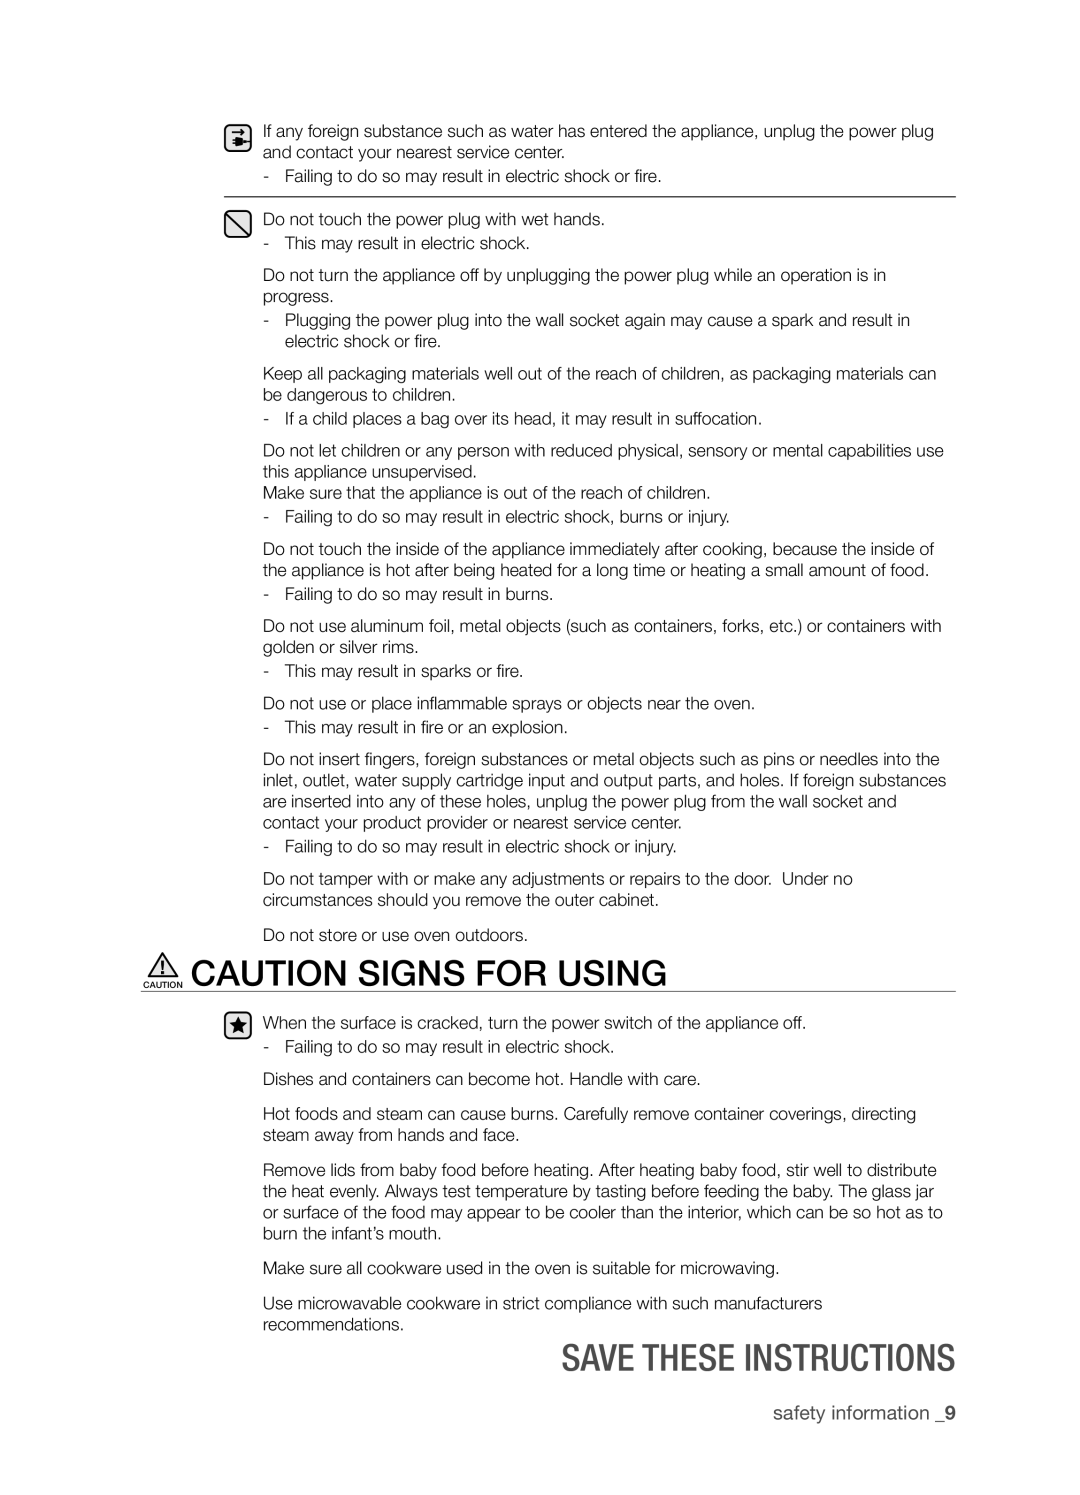 Samsung SMH9151 user manual Caution Caution Signs For Using, Save these instructions, safety information 